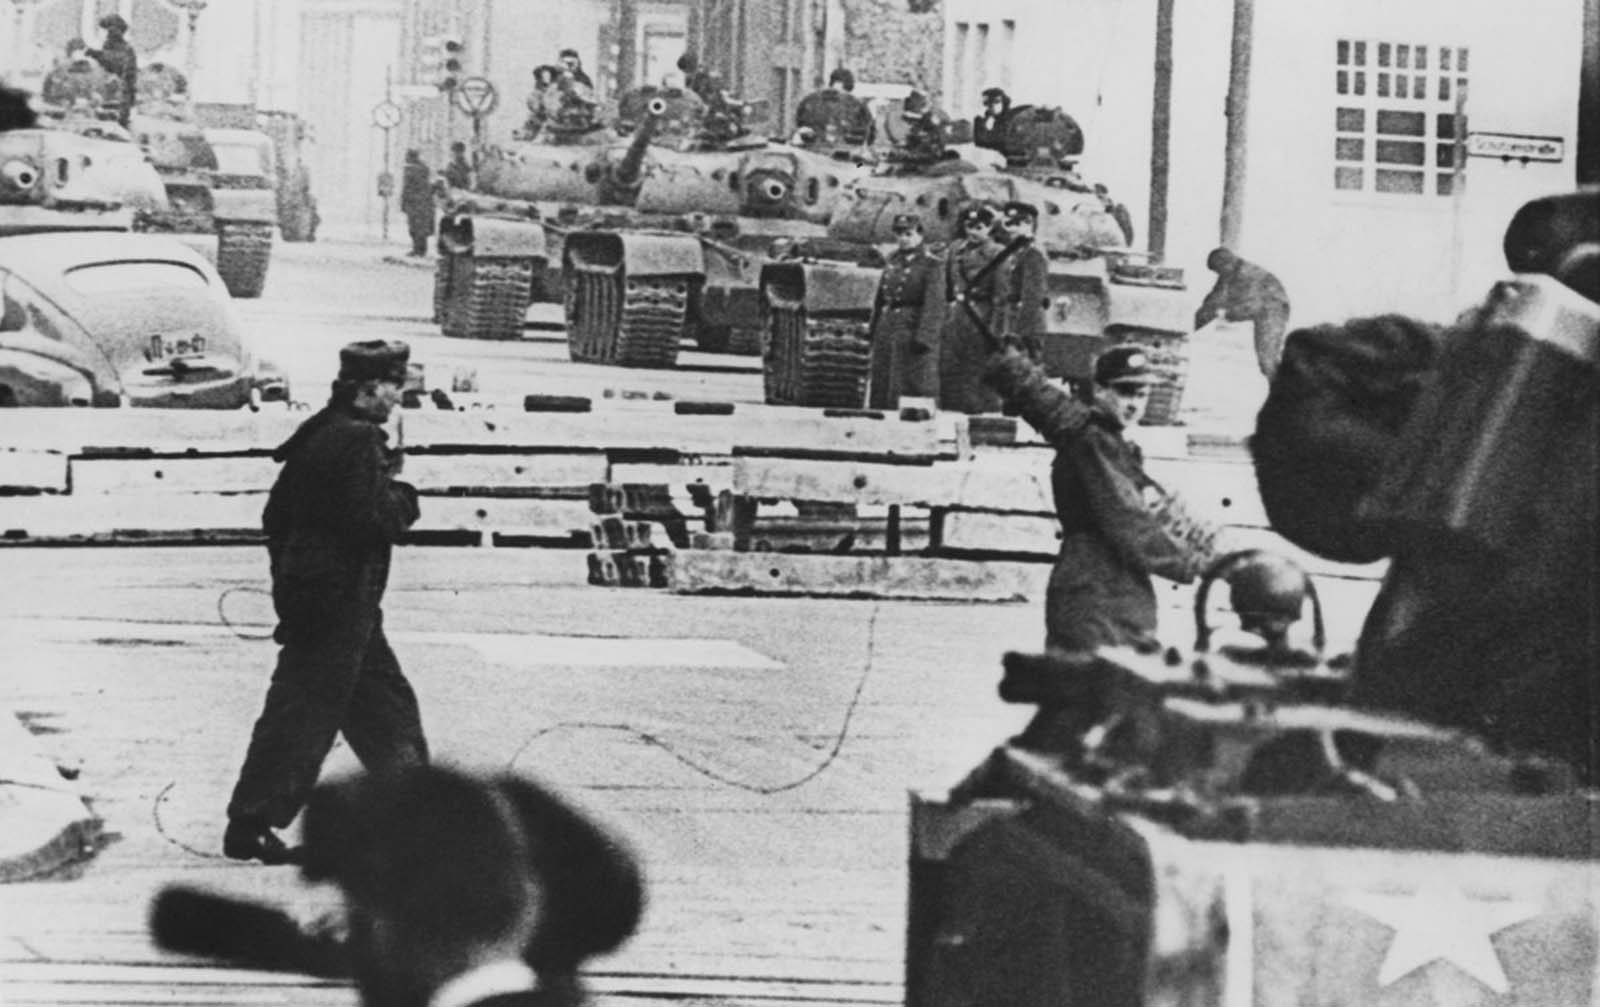 Russian (background) and American (foreground) tanks face each other at the Friedrichstrasse checkpoint in Berlin during the construction of the Berlin Wall on October 28, 1961.